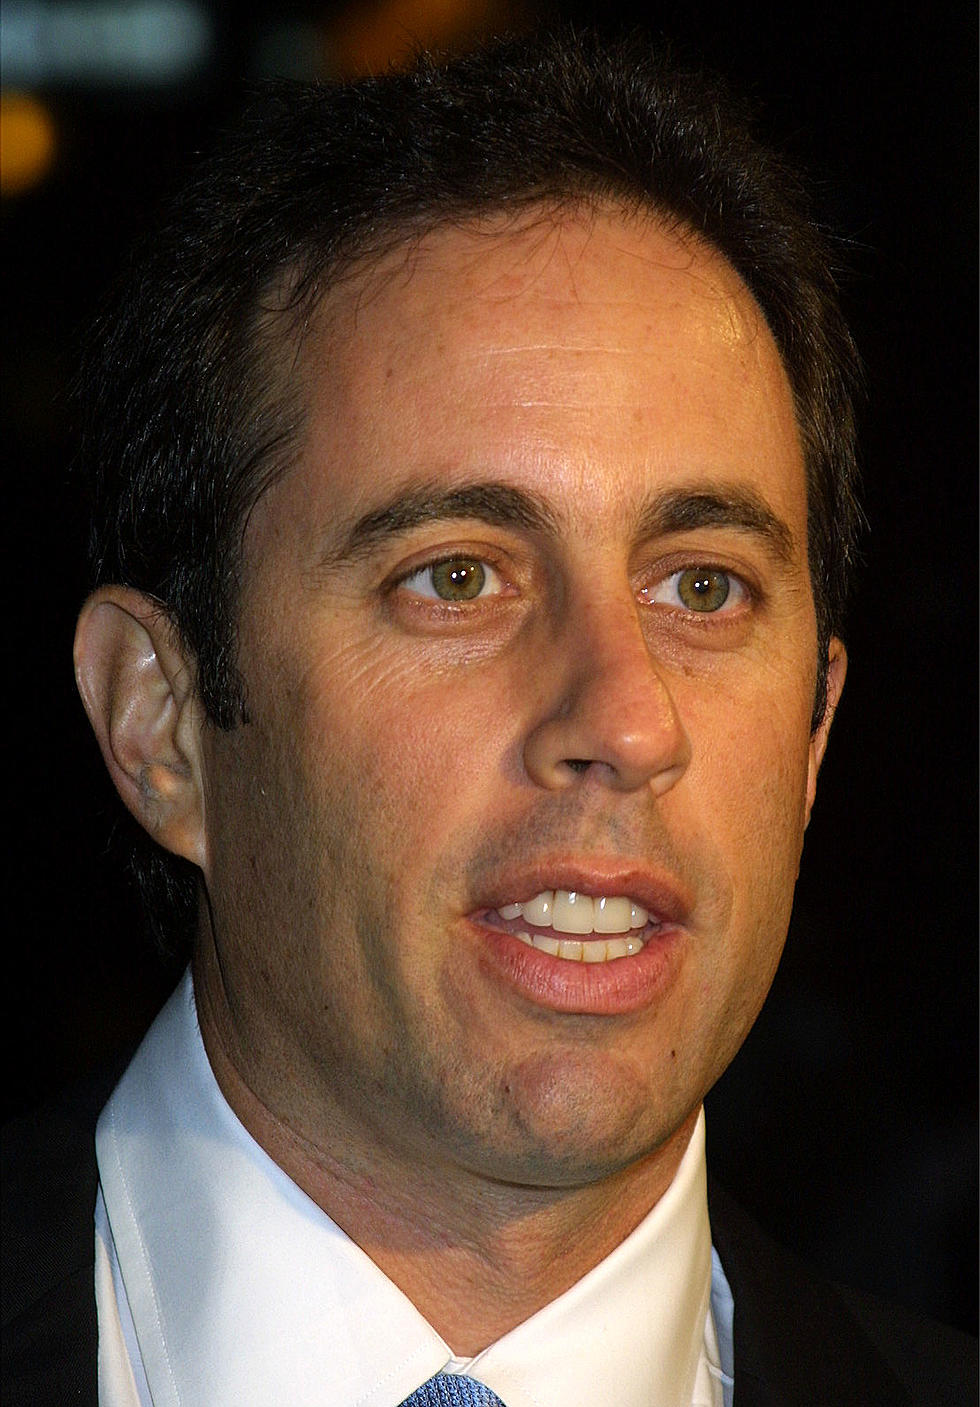 Jerry Seinfeld Turns 60 Today